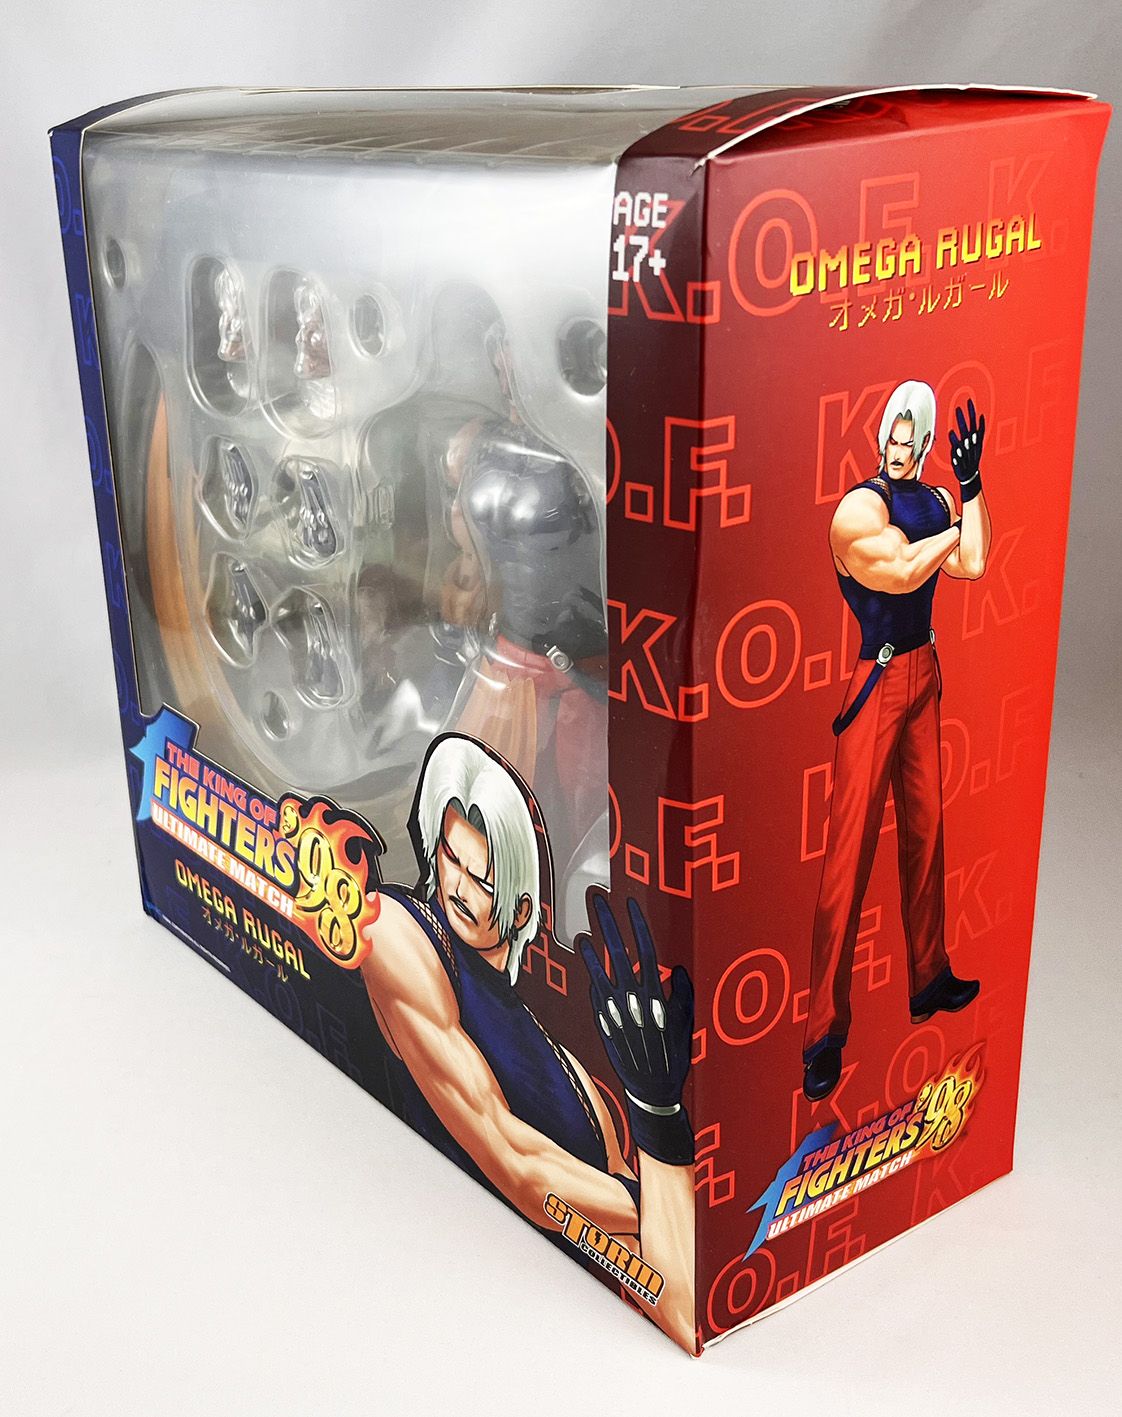 The King of Fighters '98 (Ultimate Match) - Storm Collectibles - Omega Rugal